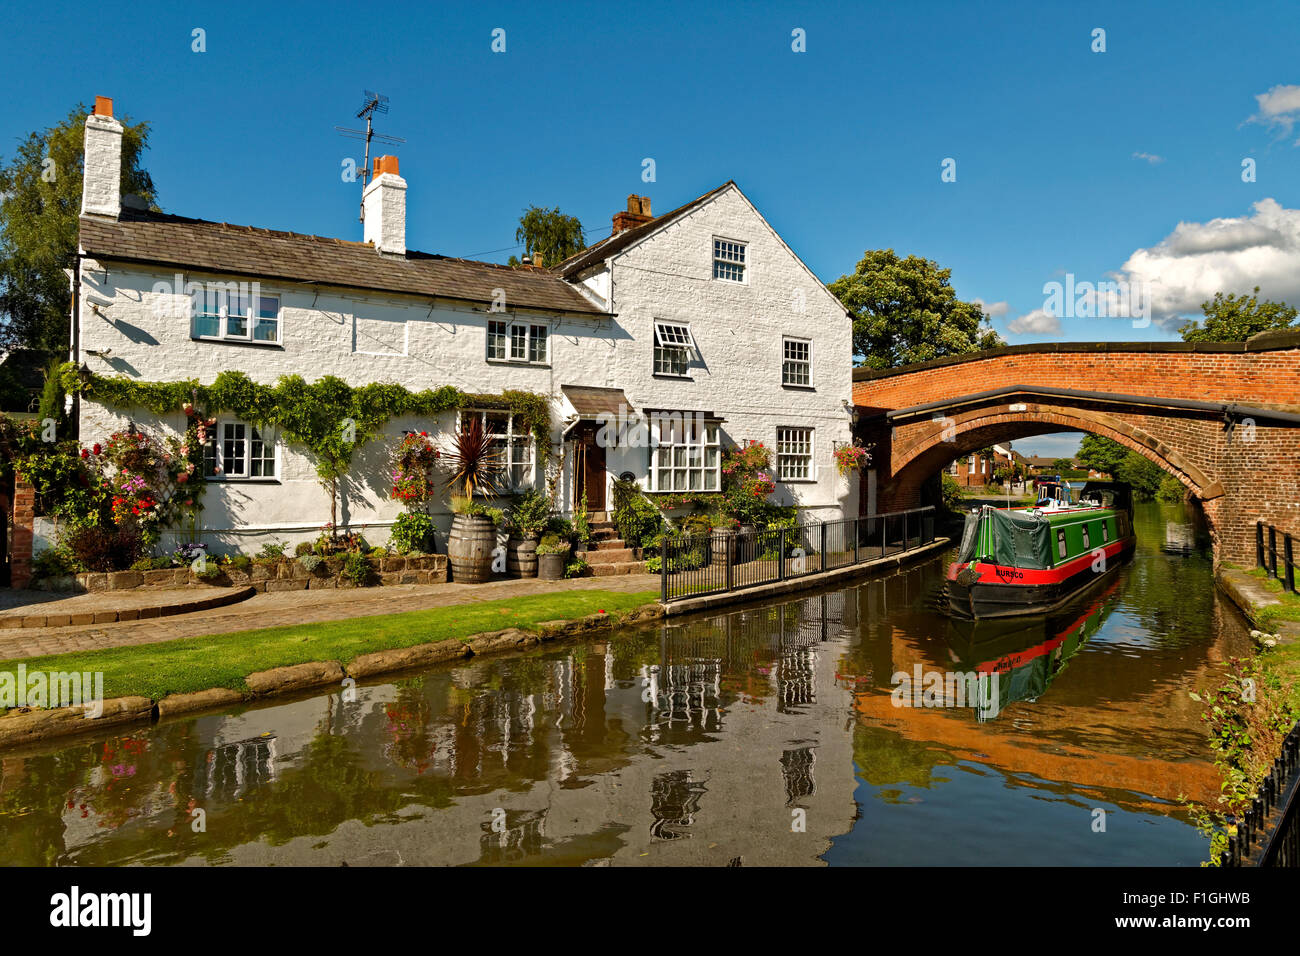 House and cottage on the banks of the Bridgewater canal at Lymm in Cheshire, England. Stock Photo